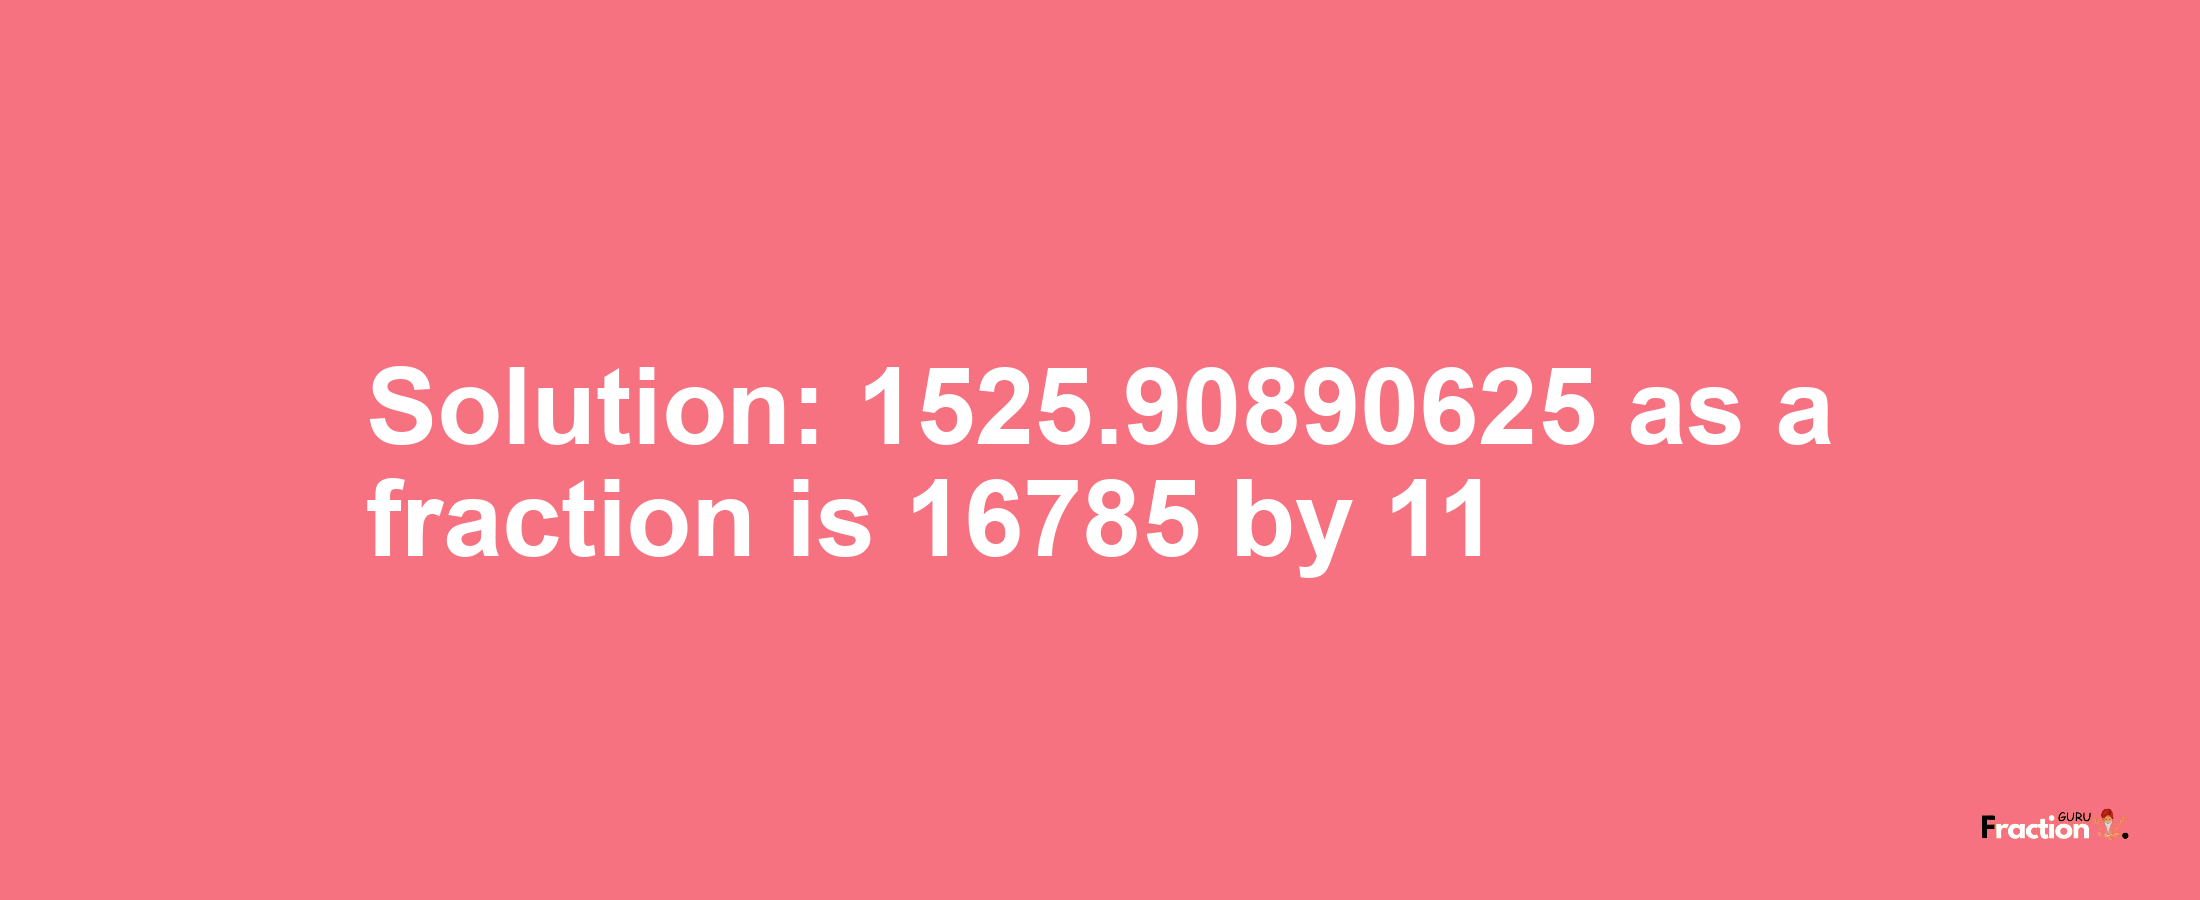 Solution:1525.90890625 as a fraction is 16785/11